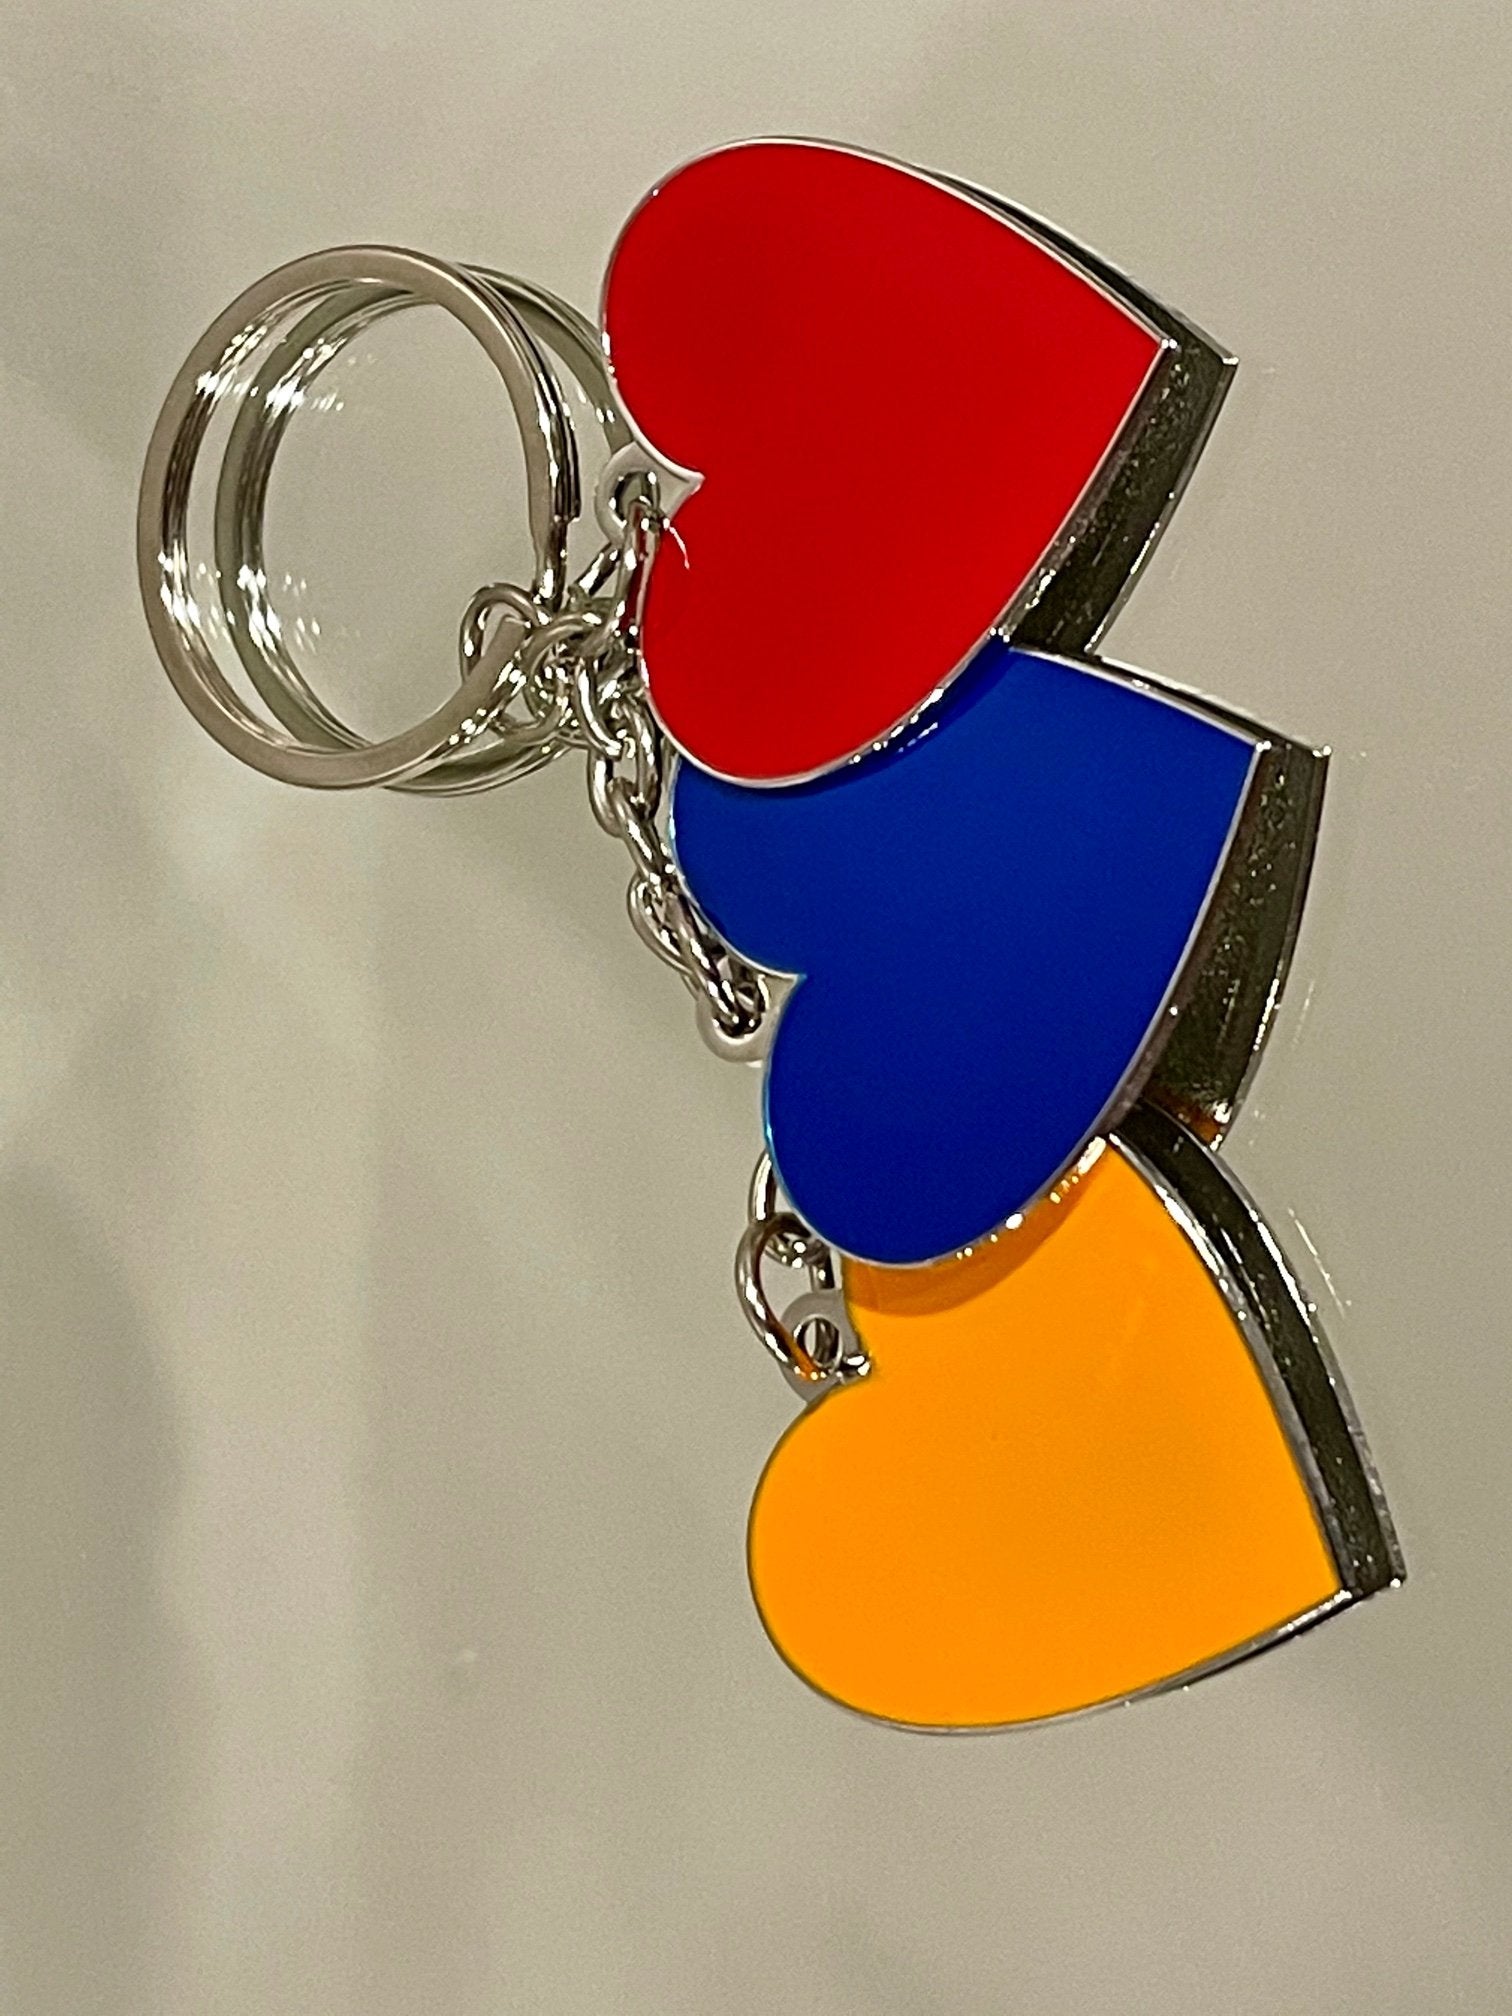 Anet's Collection Hearts of Armenia Keychain